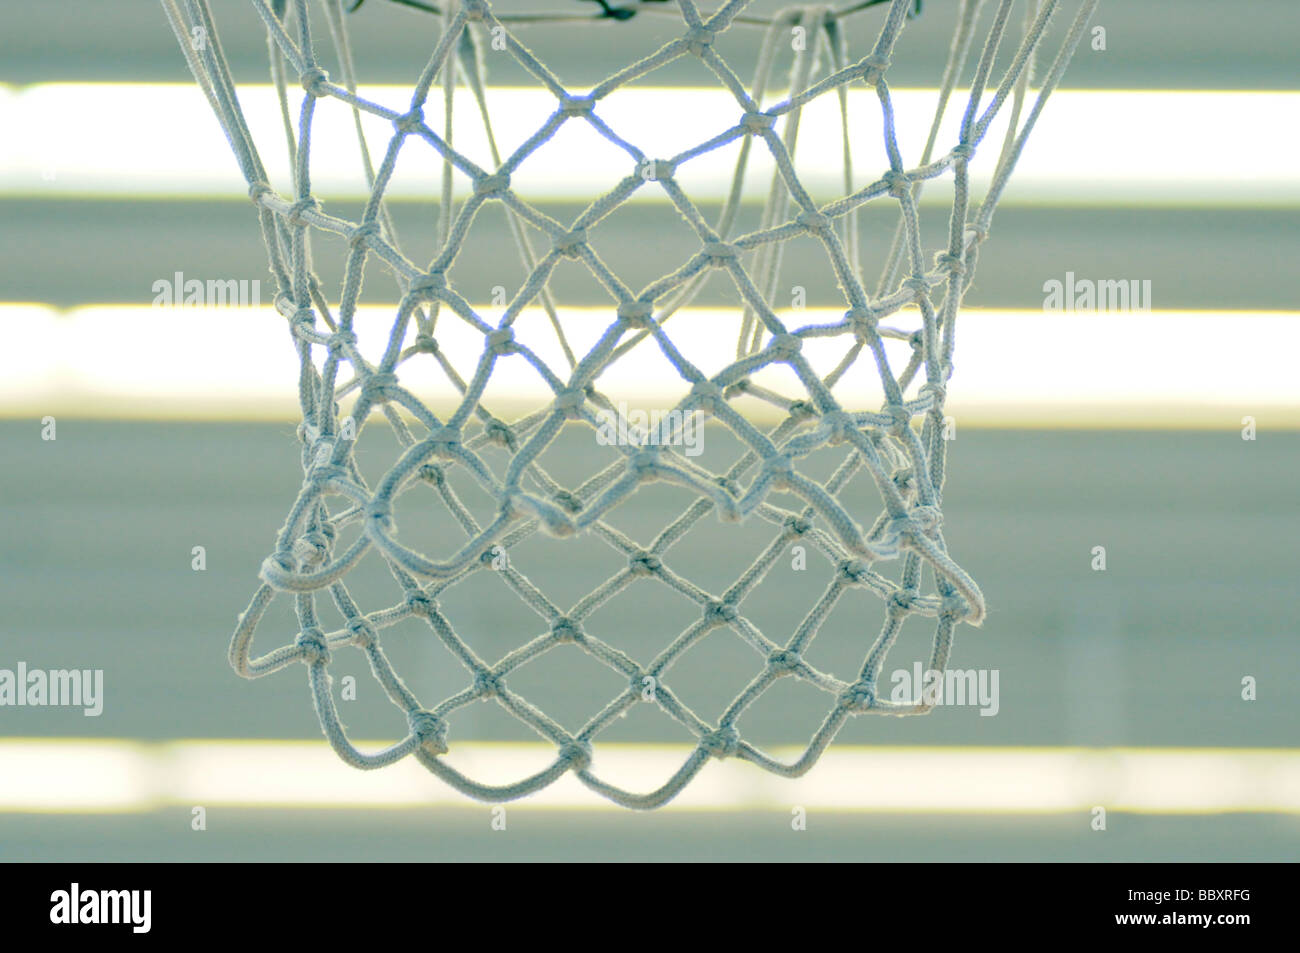 Royalty free photograph of basketball netball net hanging in sports hall. london UK Stock Photo